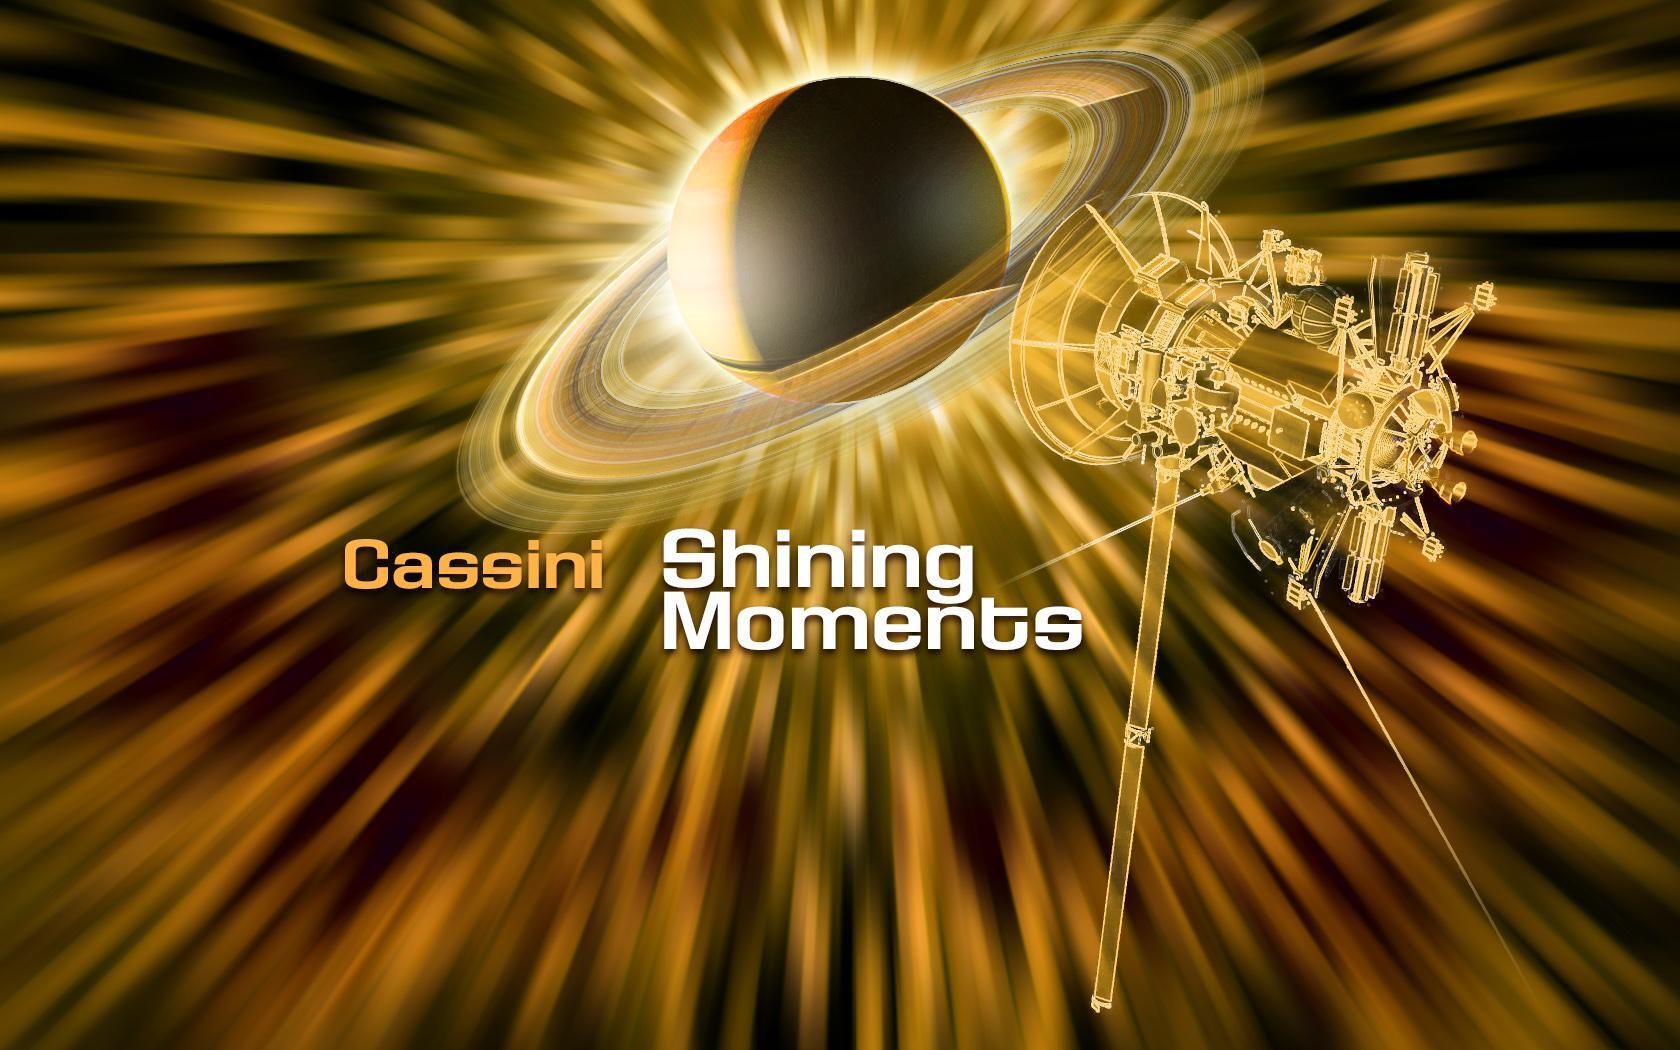 What's your favorite Cassini moment? There are tons to choose from, but we want to start by hearing from you.